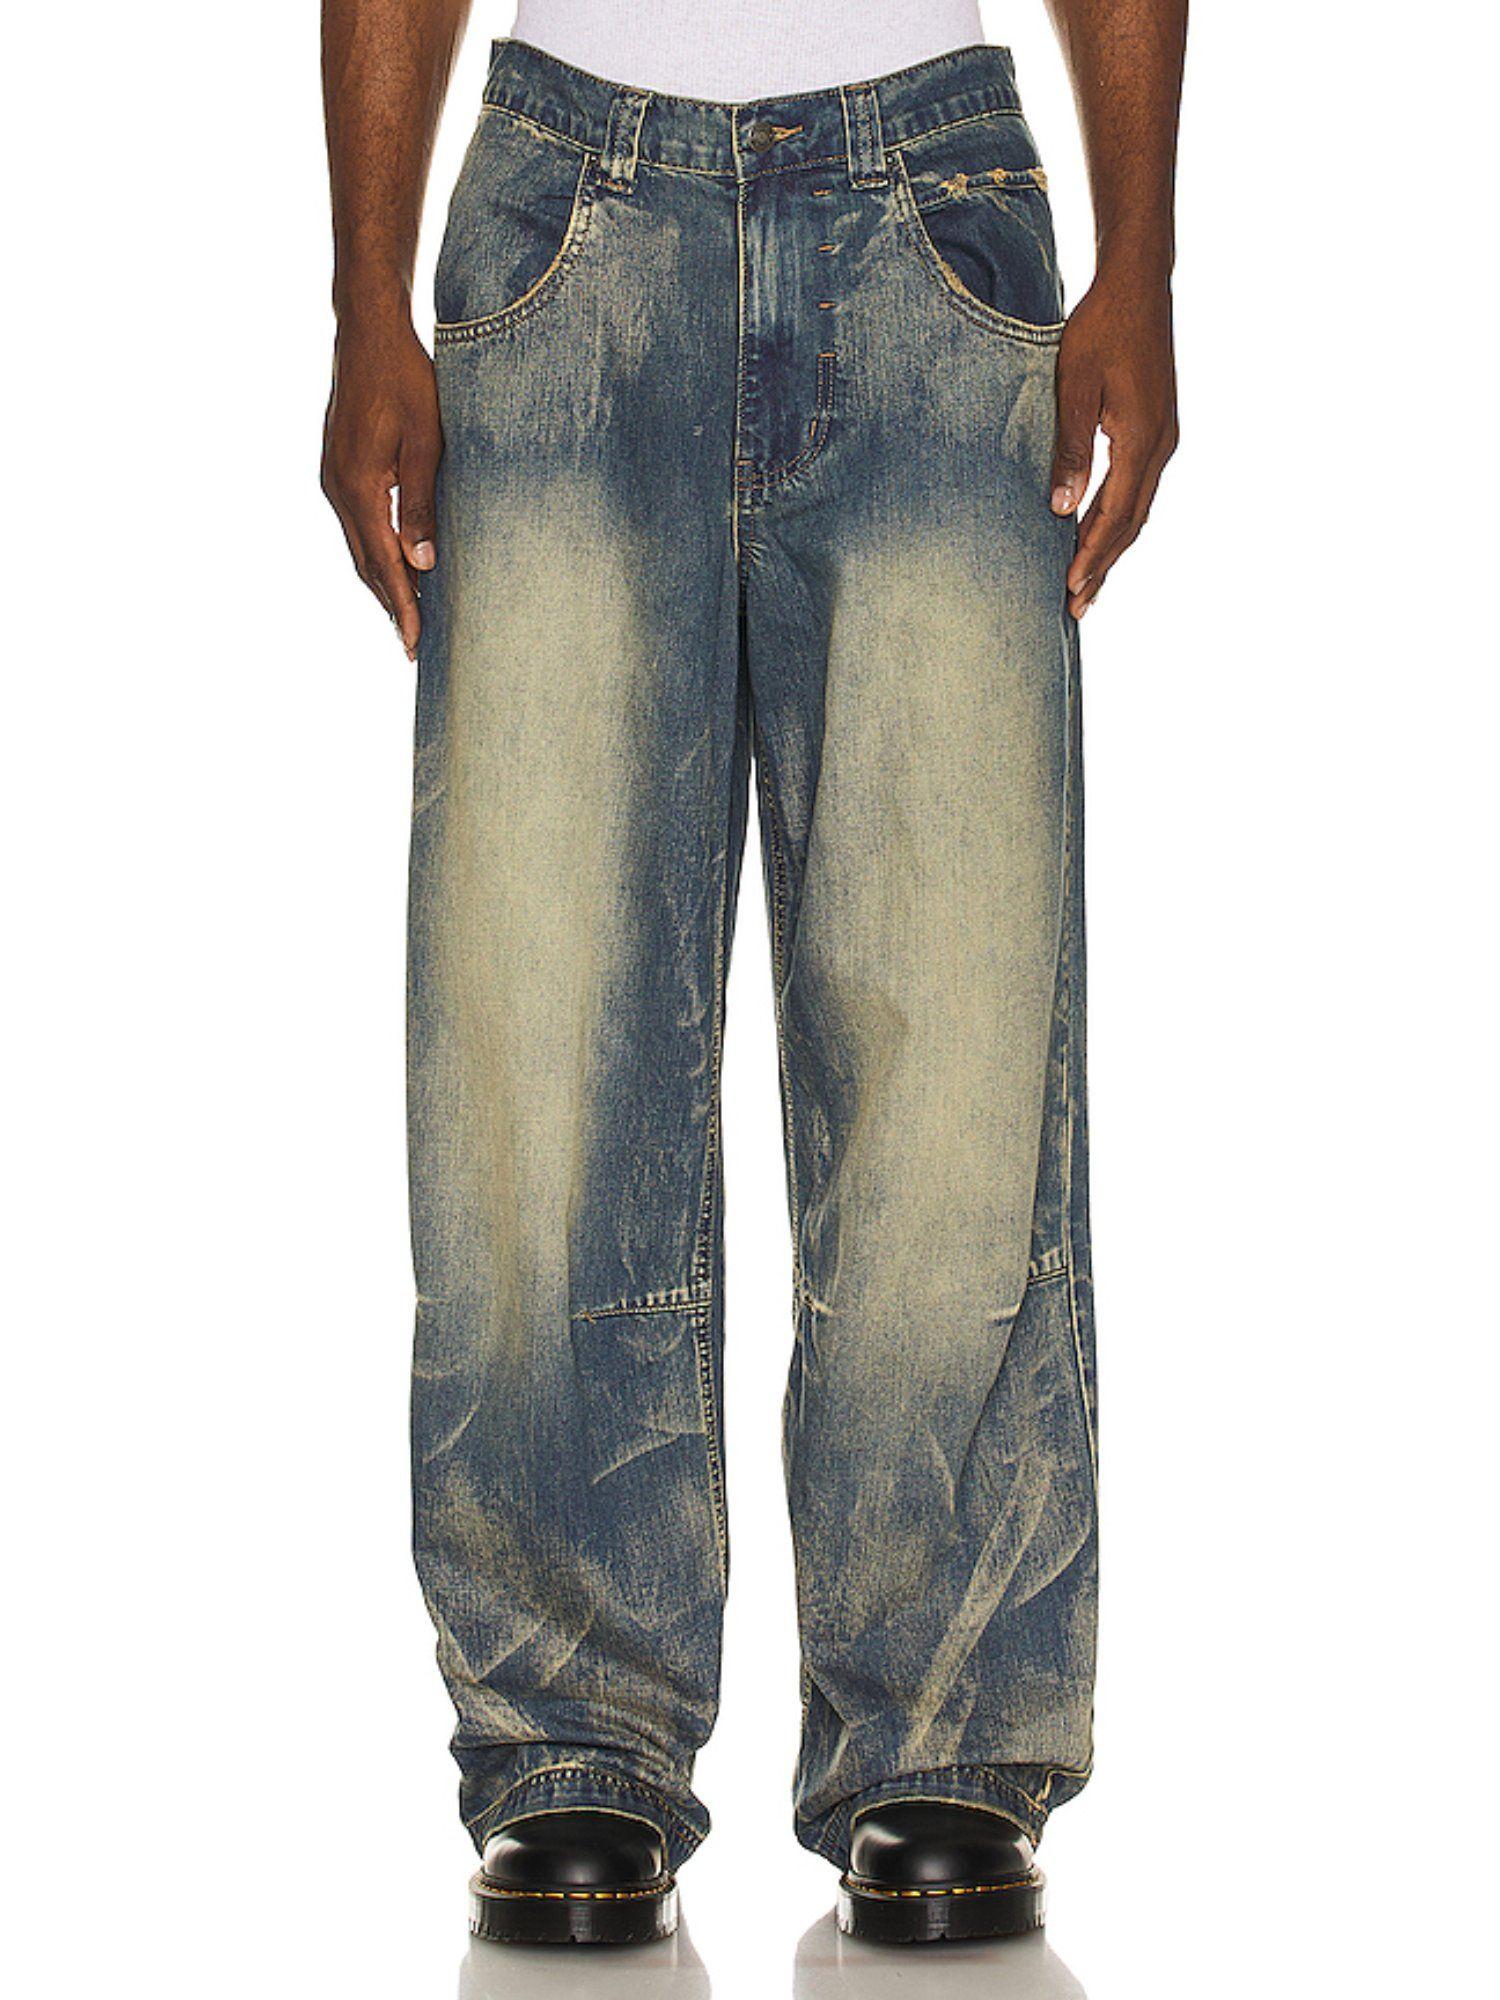 wing-print-studded-lowrise-colossus-jeans